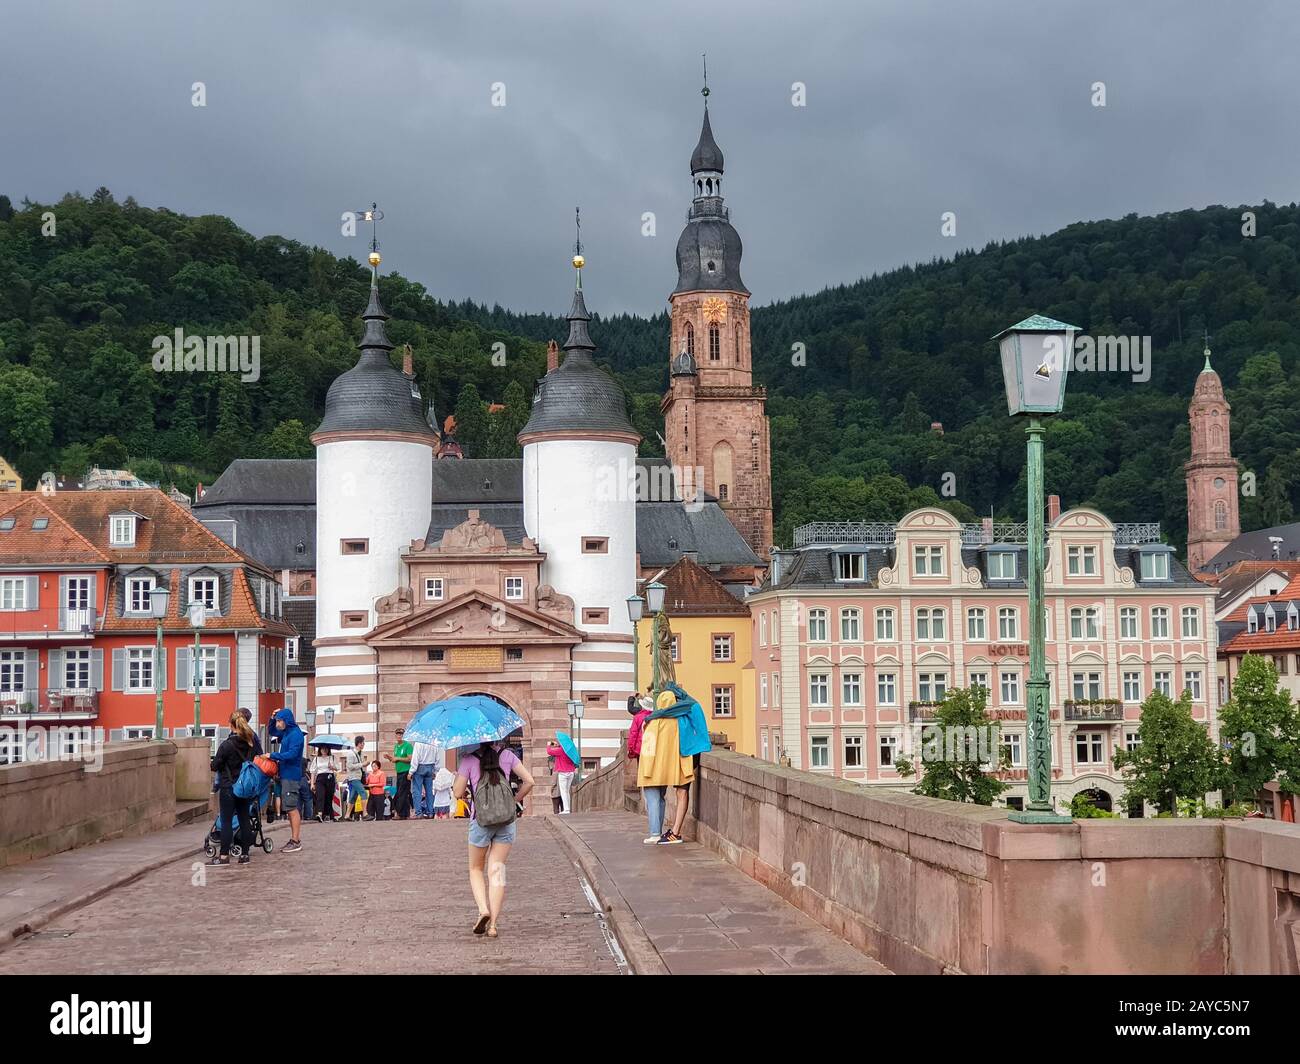 People stroll on the Old Bridge in the beautiful medieval city of Heidelberg in Germany Stock Photo